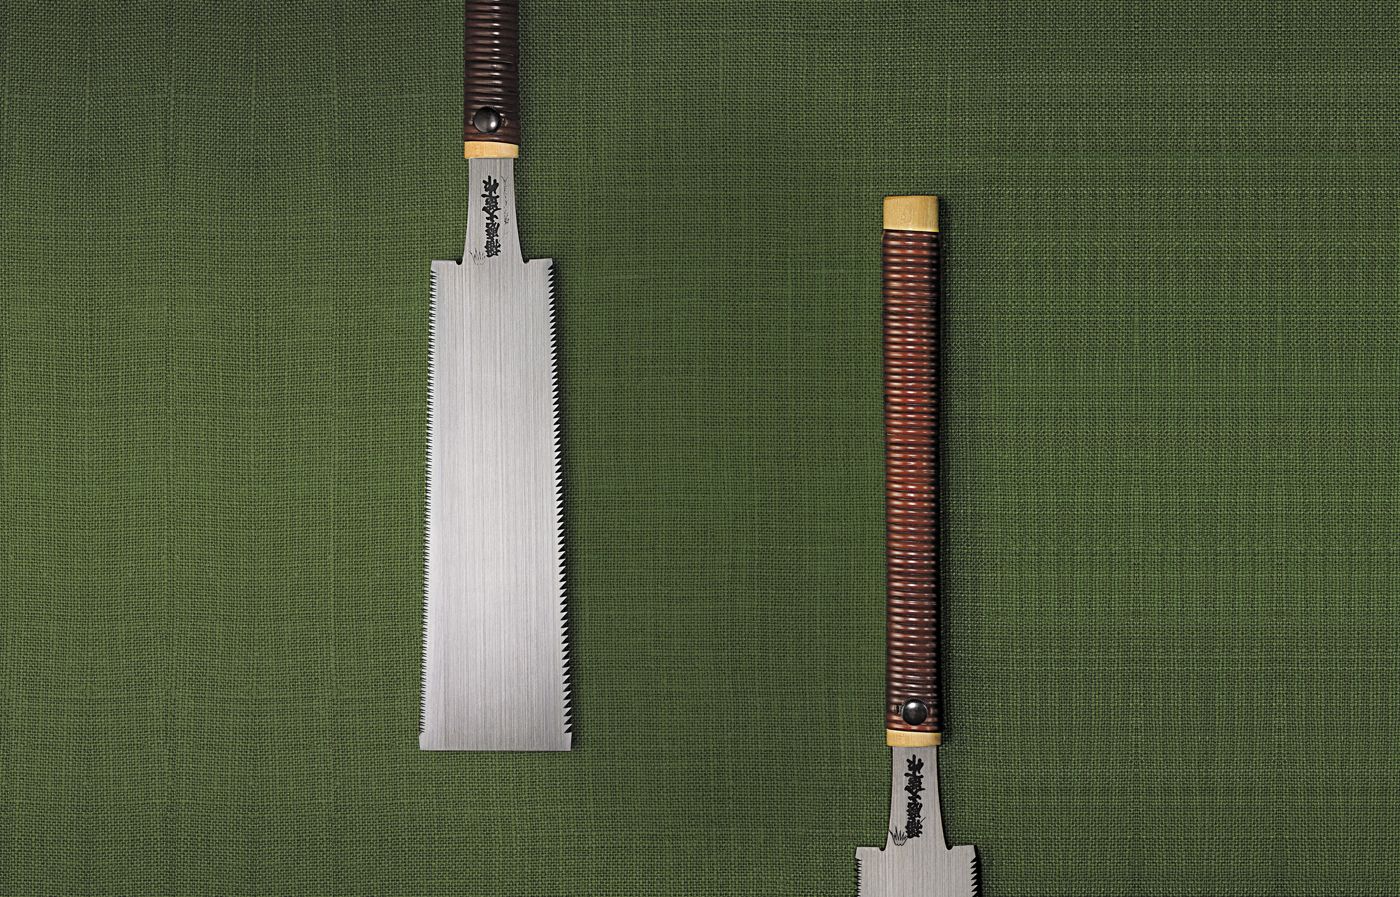 Cover image for This Old House's Guide to Japanese Hand Saws, detailing a Japanese handsaw blade and wooden Japanese hand saw handle against a green background.